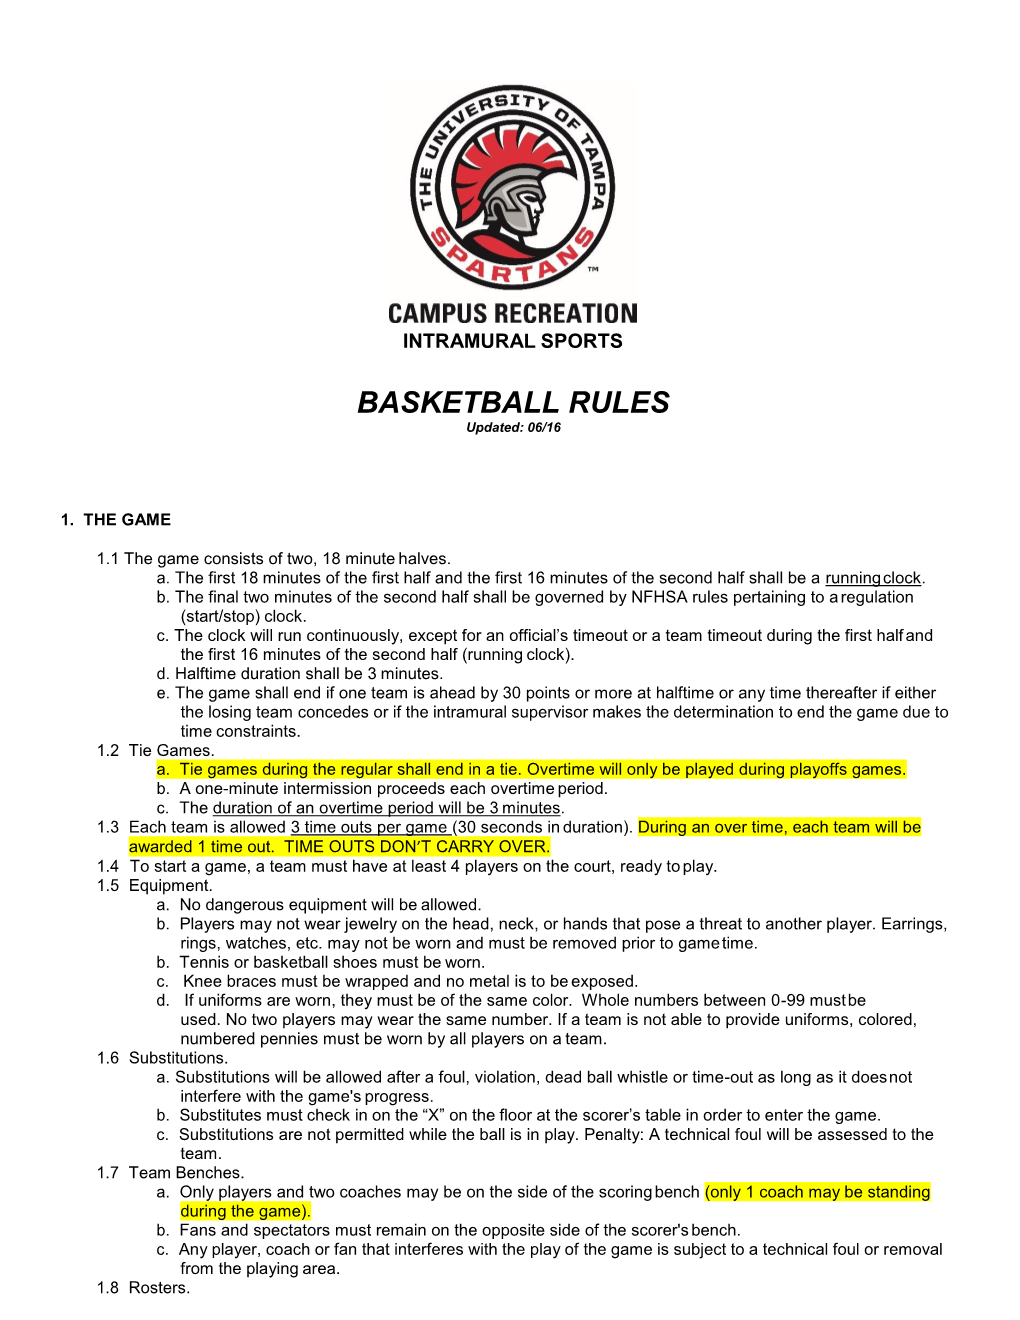 BASKETBALL RULES Updated: 06/16